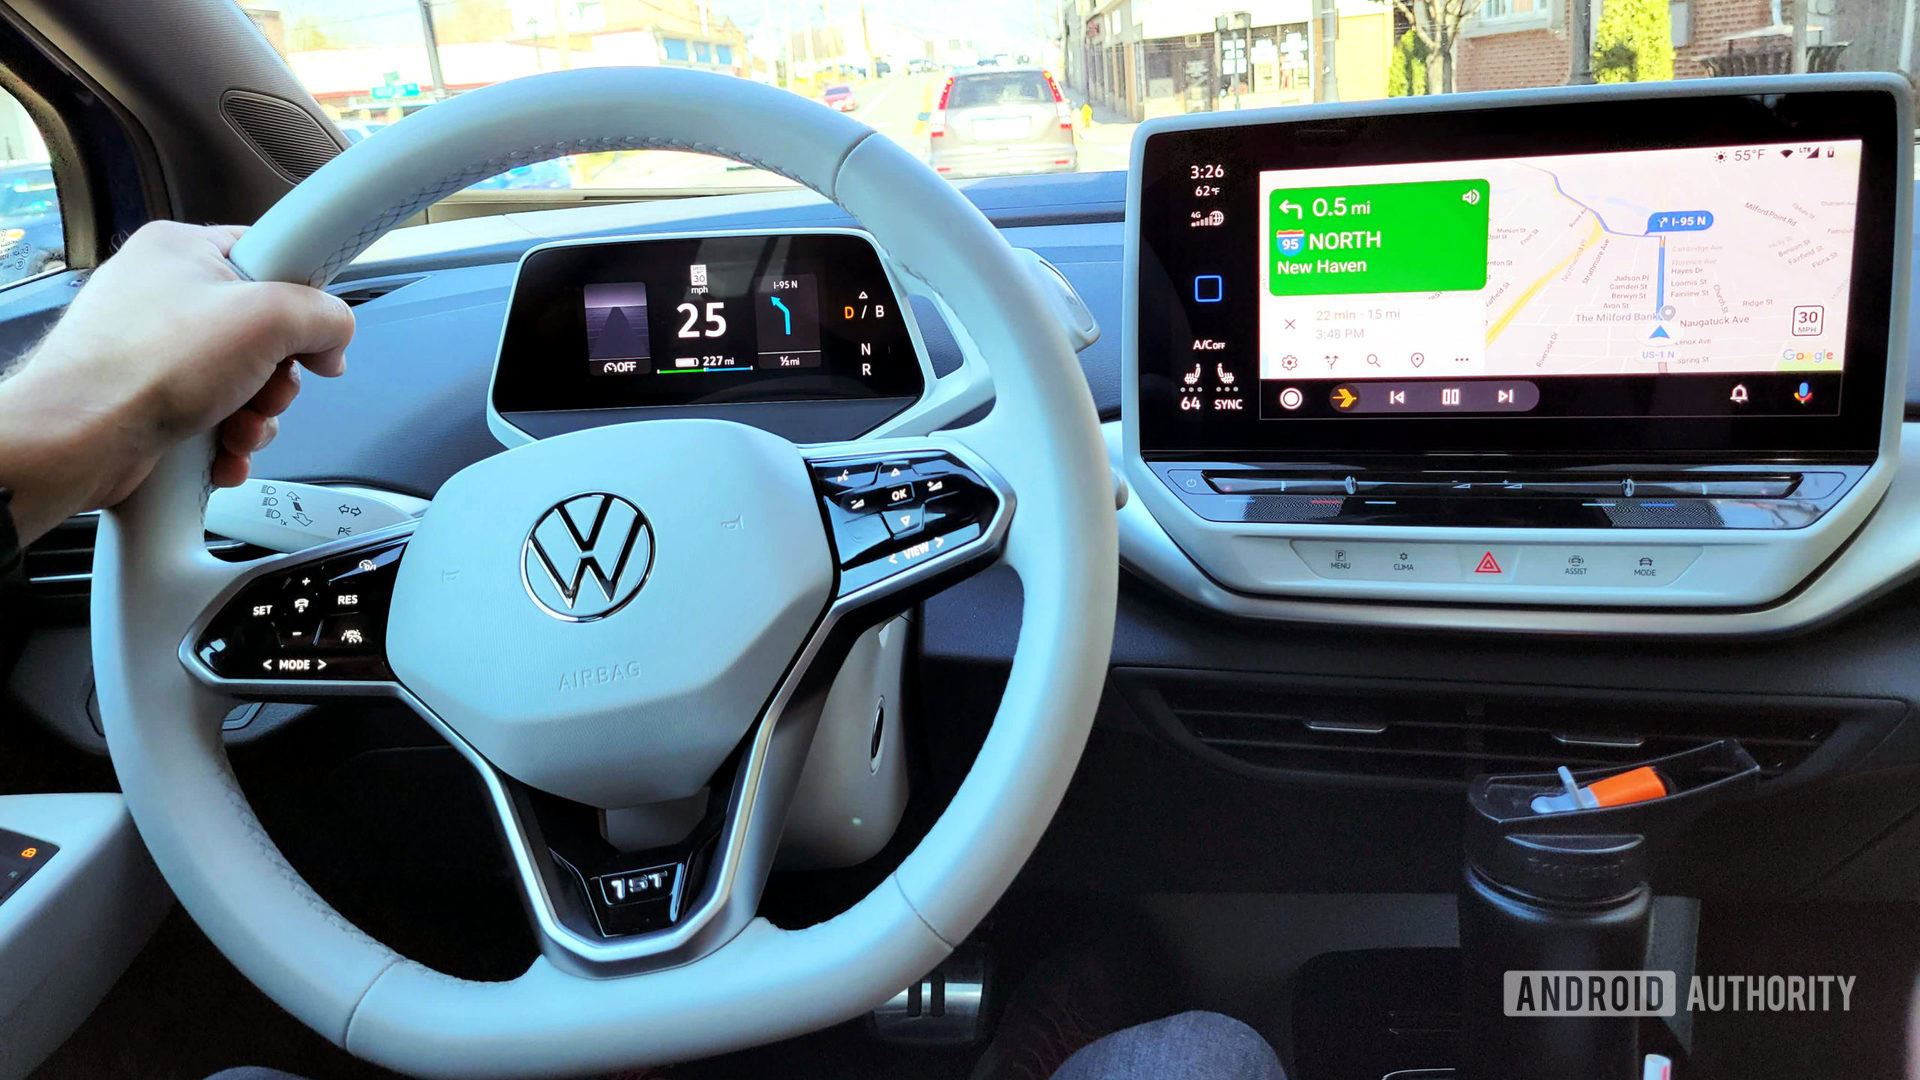 Google addressing Moto G issues with Android Auto